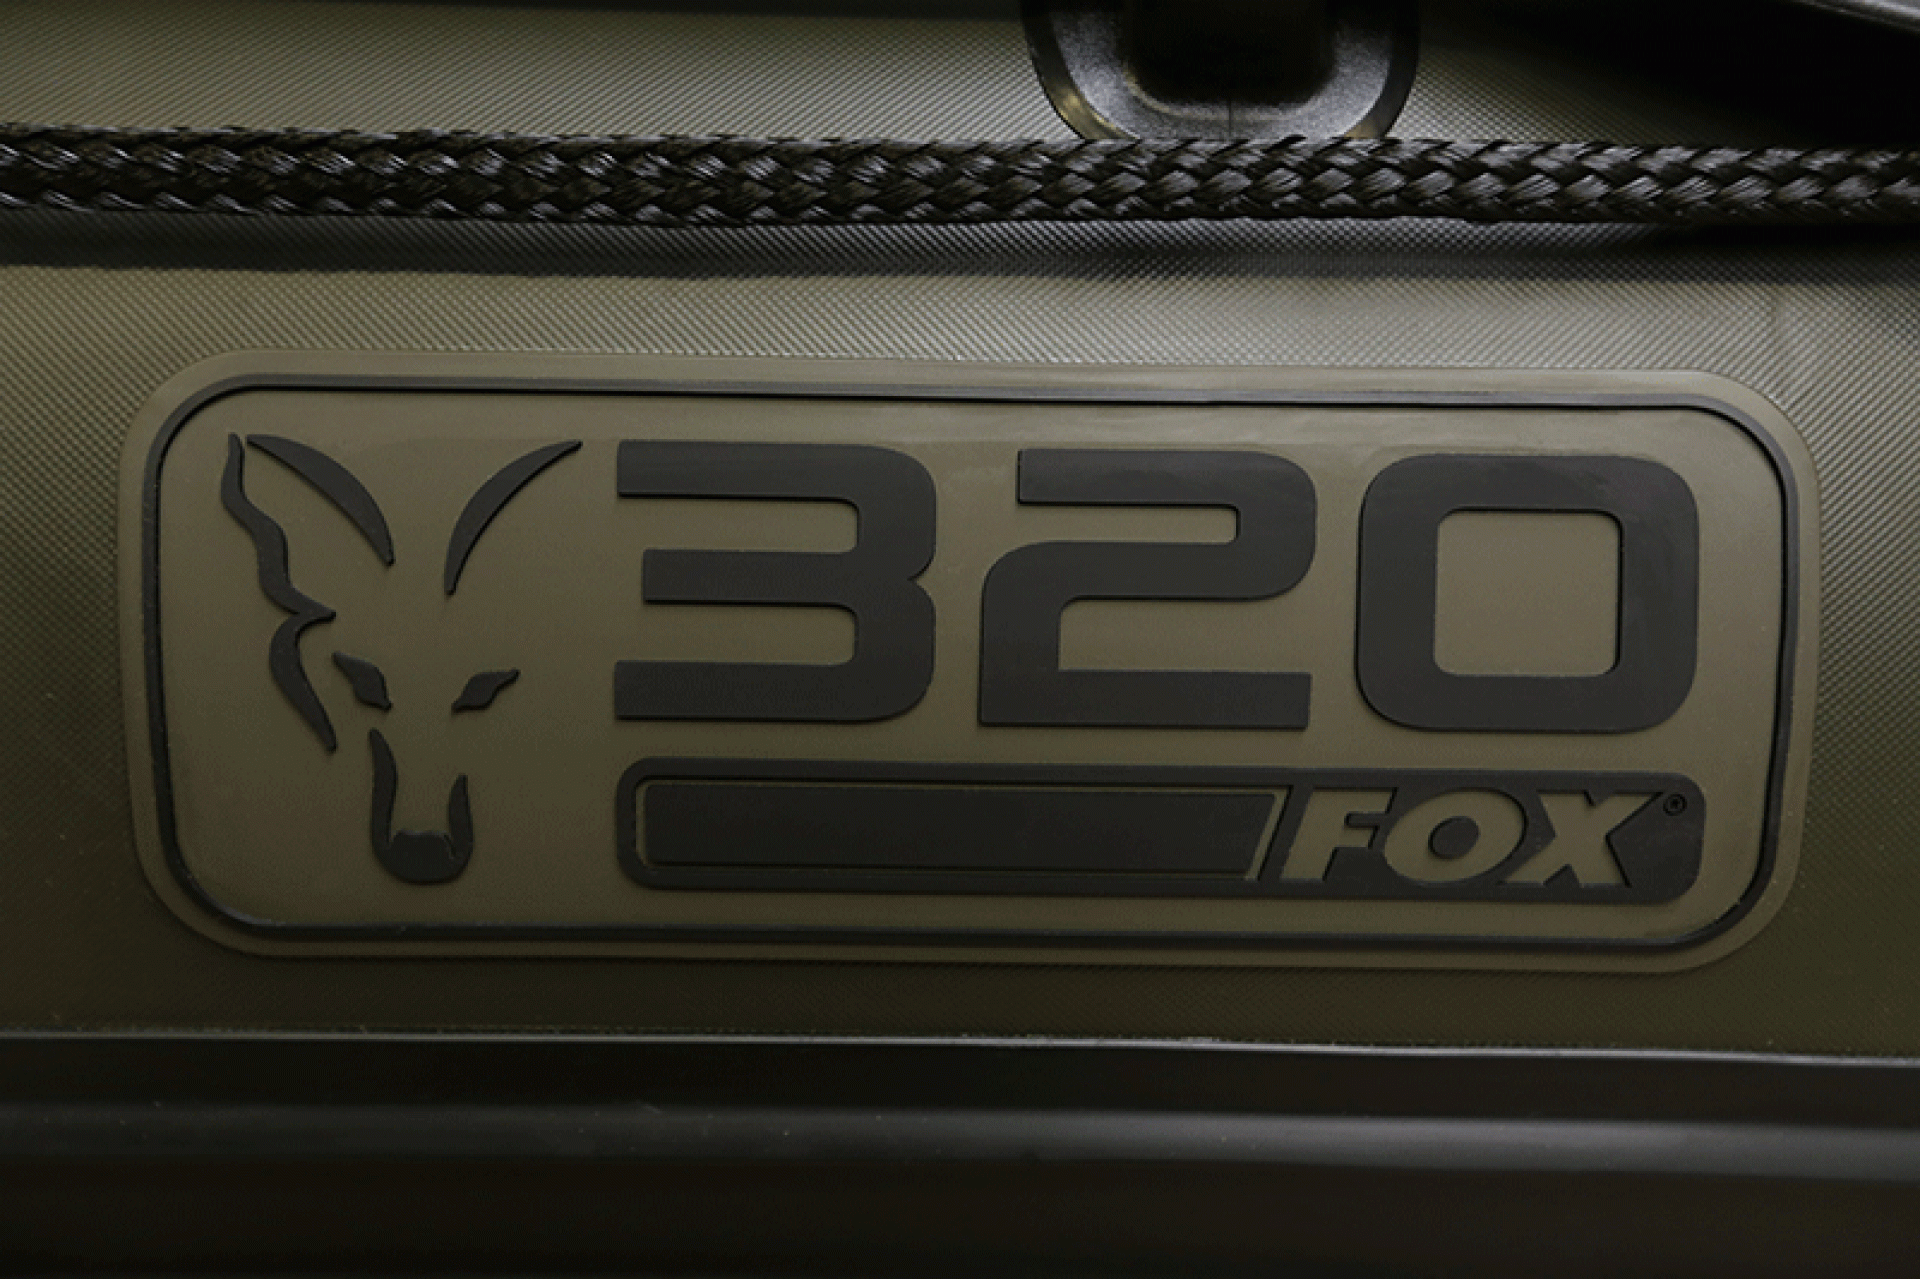 Fox 320 Green Inflatable Boat